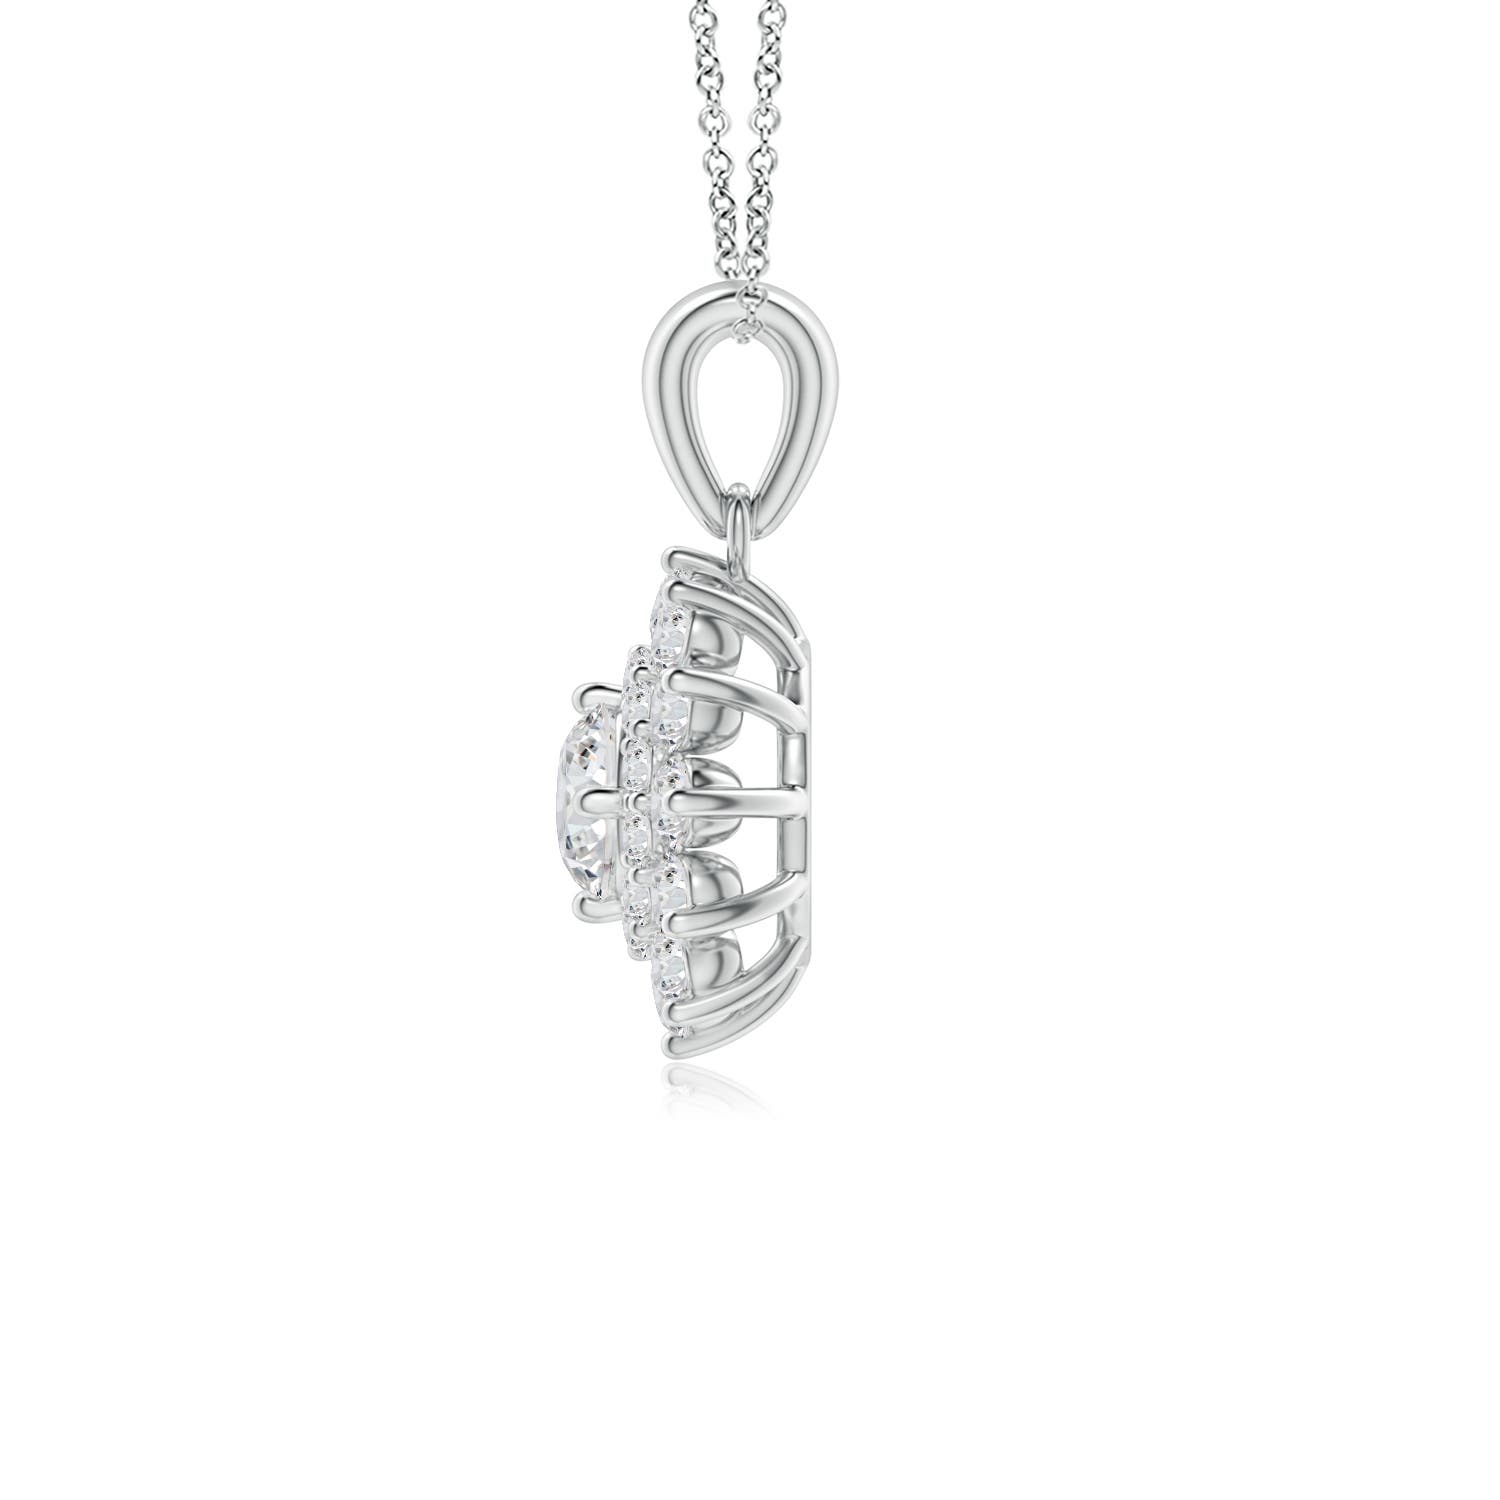 H, SI2 / 0.88 CT / 14 KT White Gold